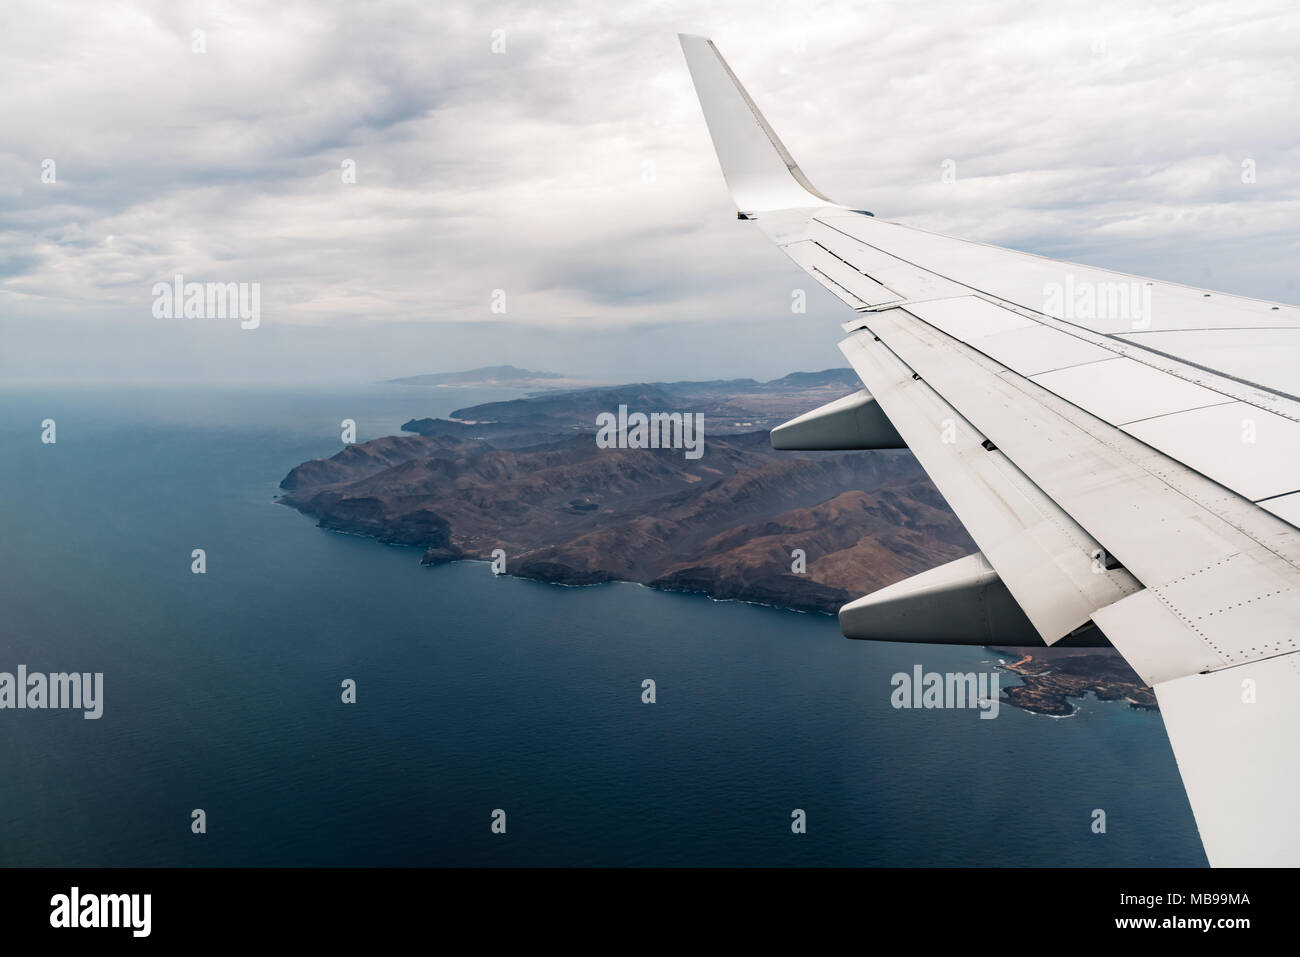 Looking through window of airplane with wing during flight against volcanic island and sea Stock Photo